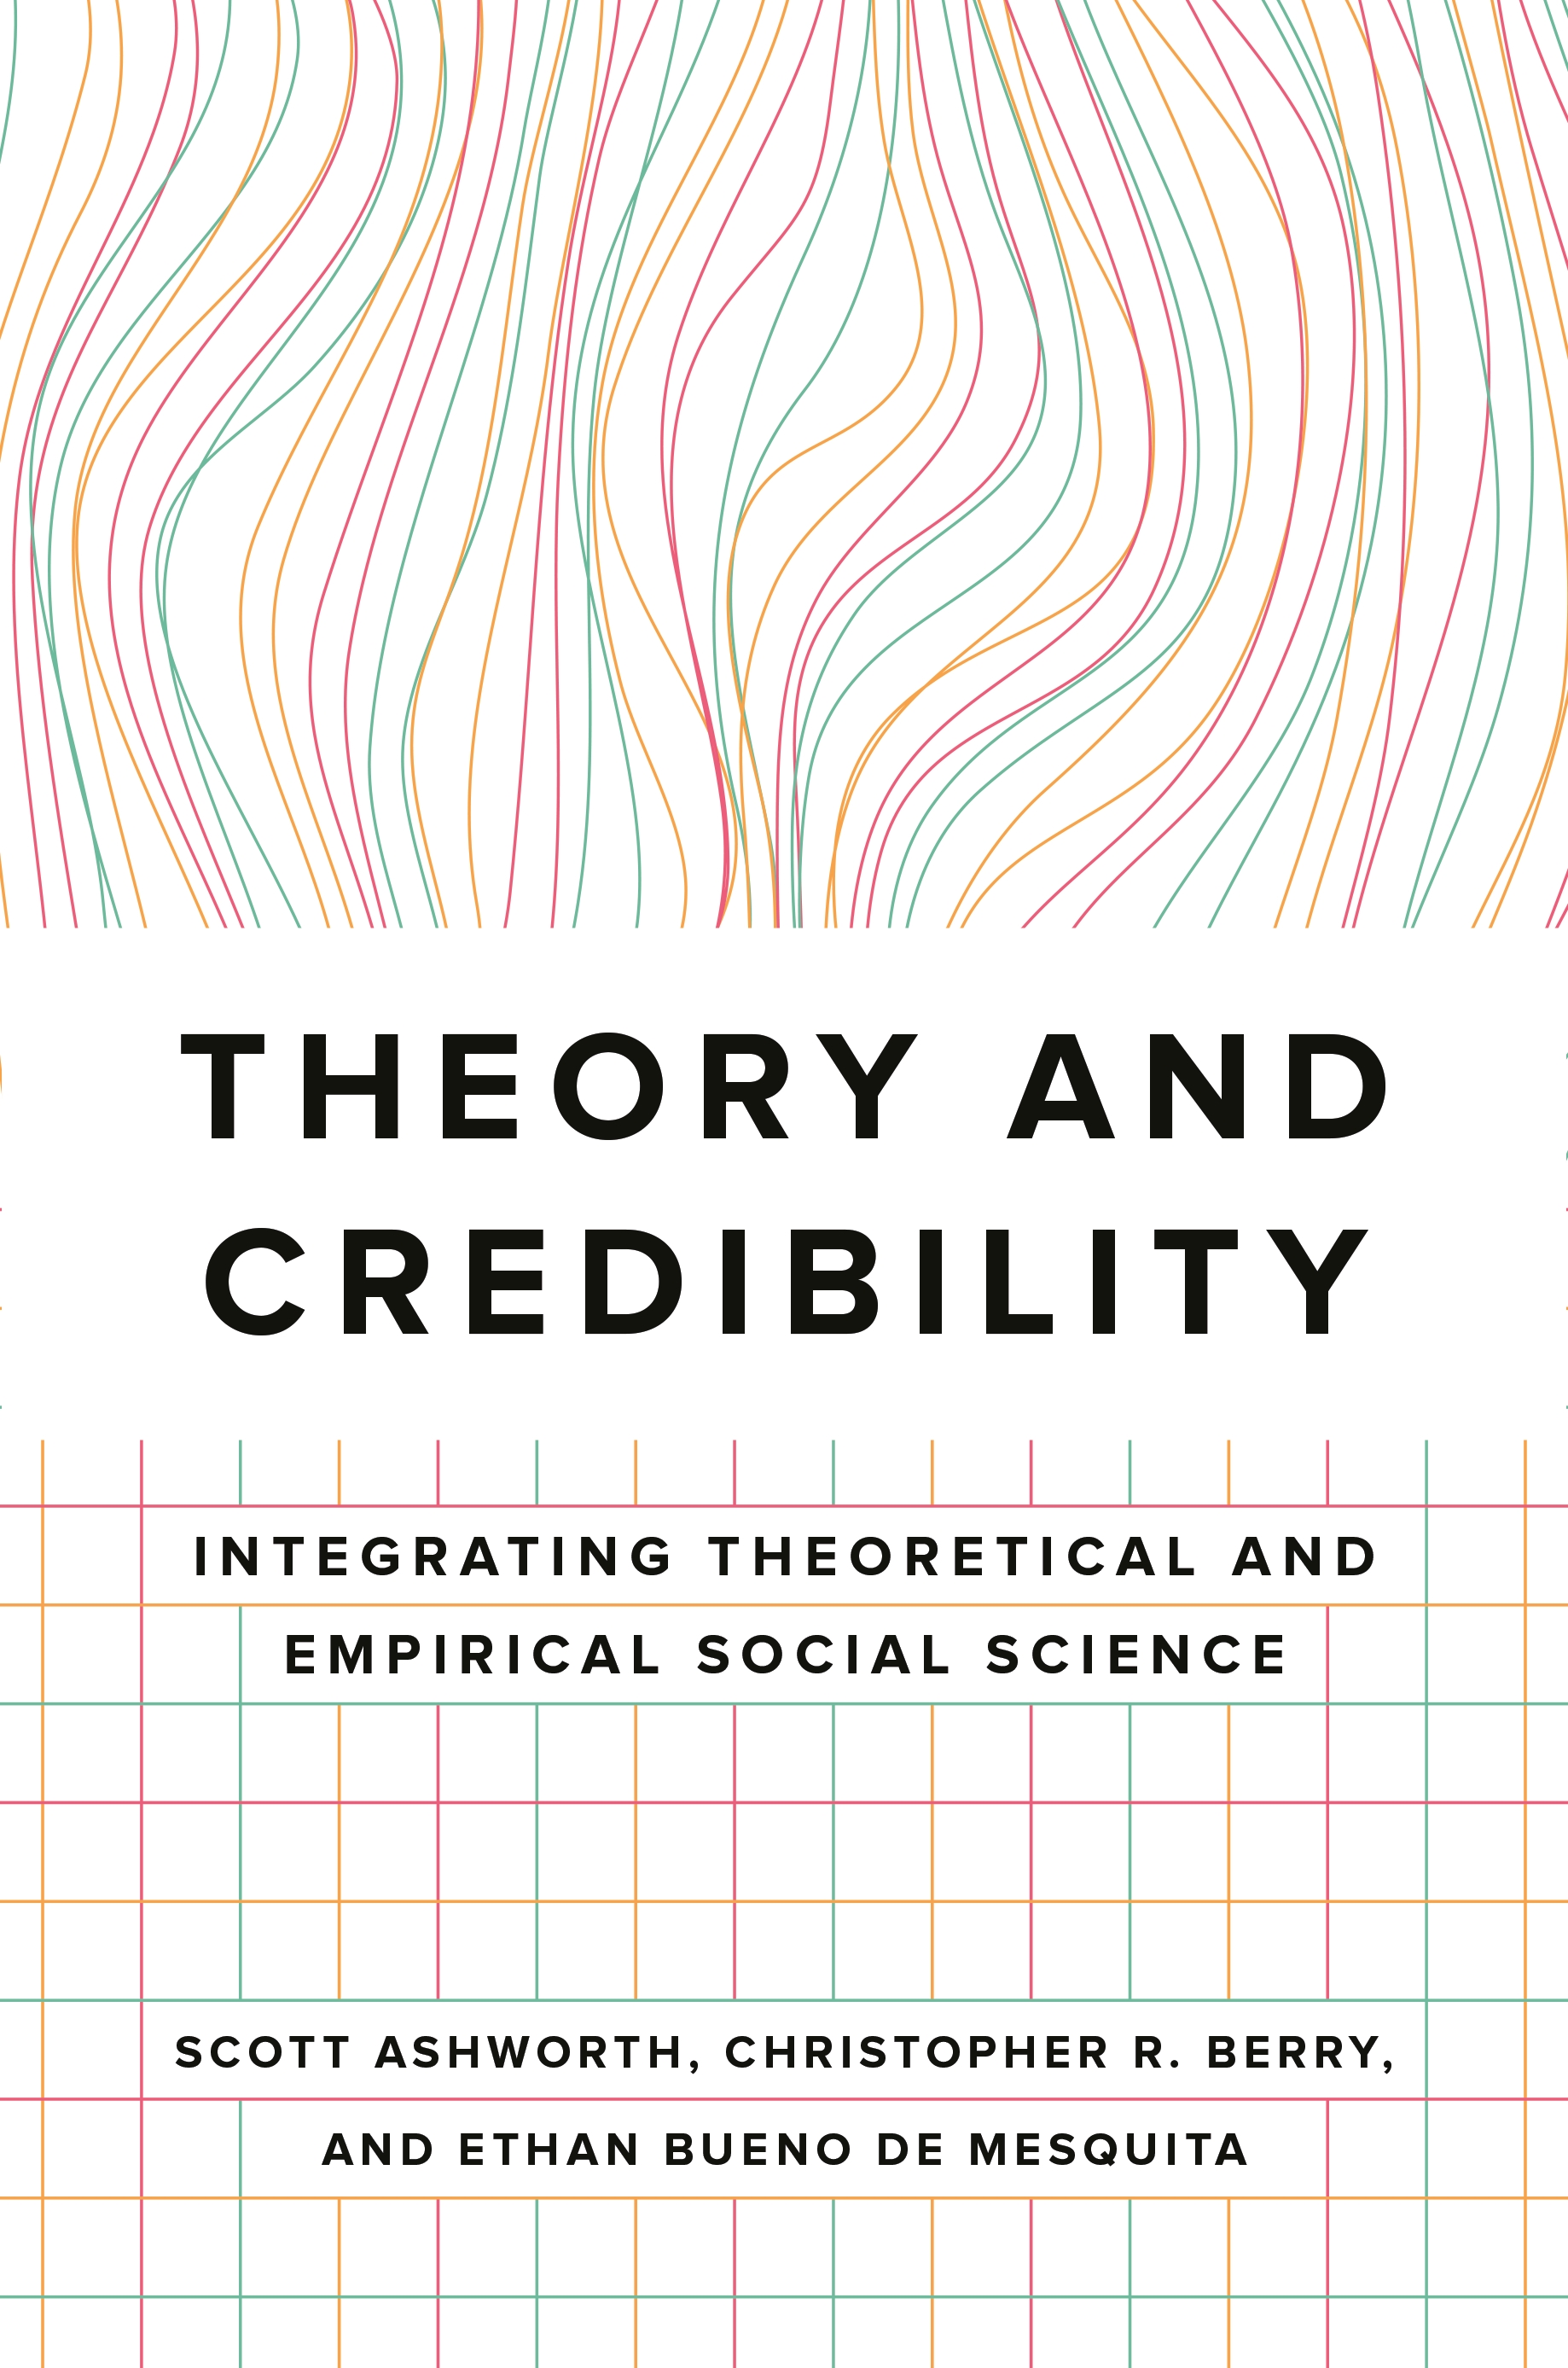 social science theories related to education